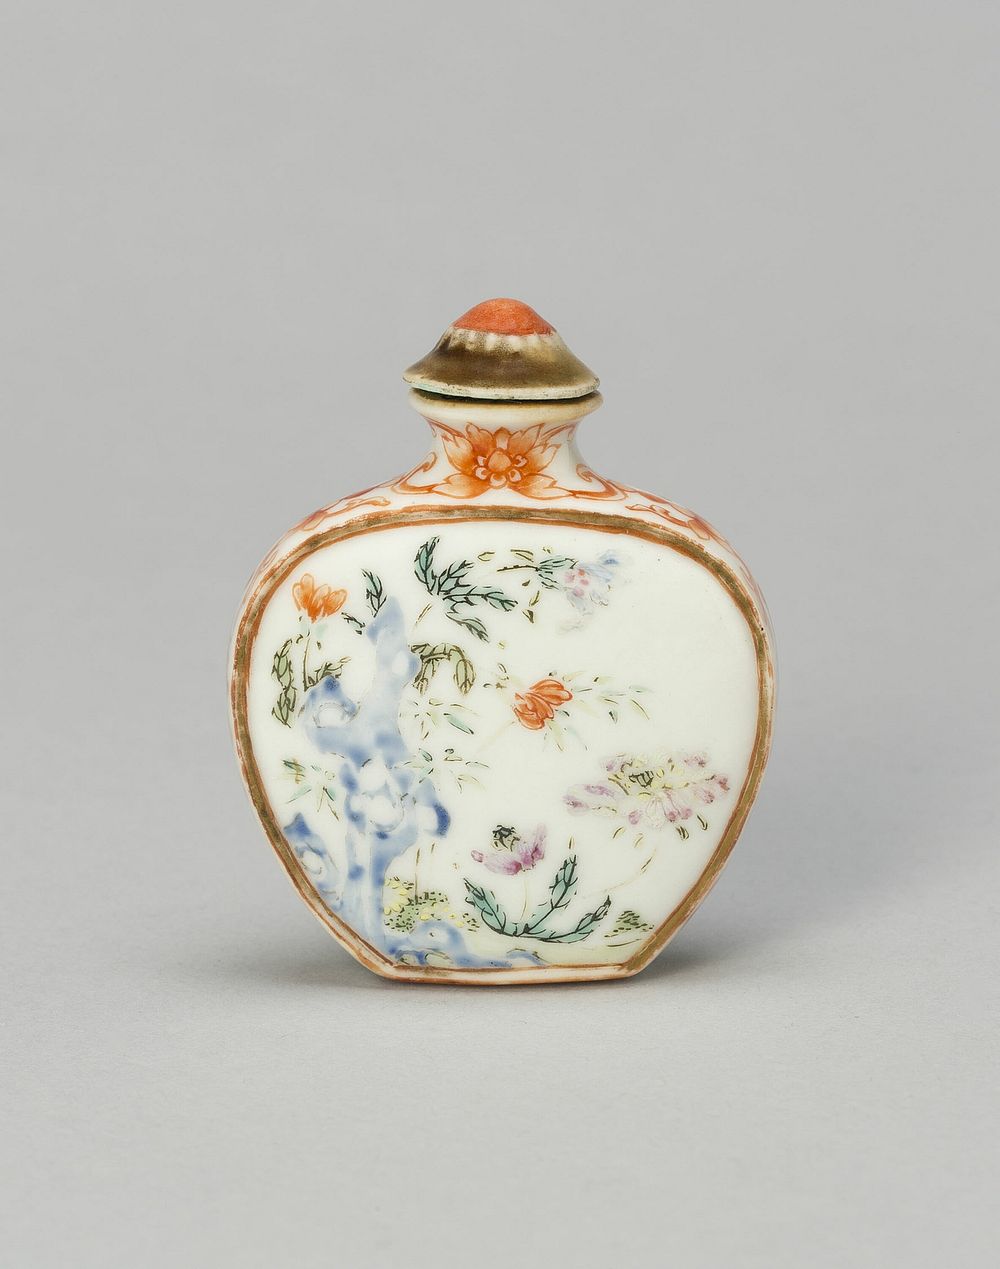 Snuff Bottle with Flowers and Rockwork